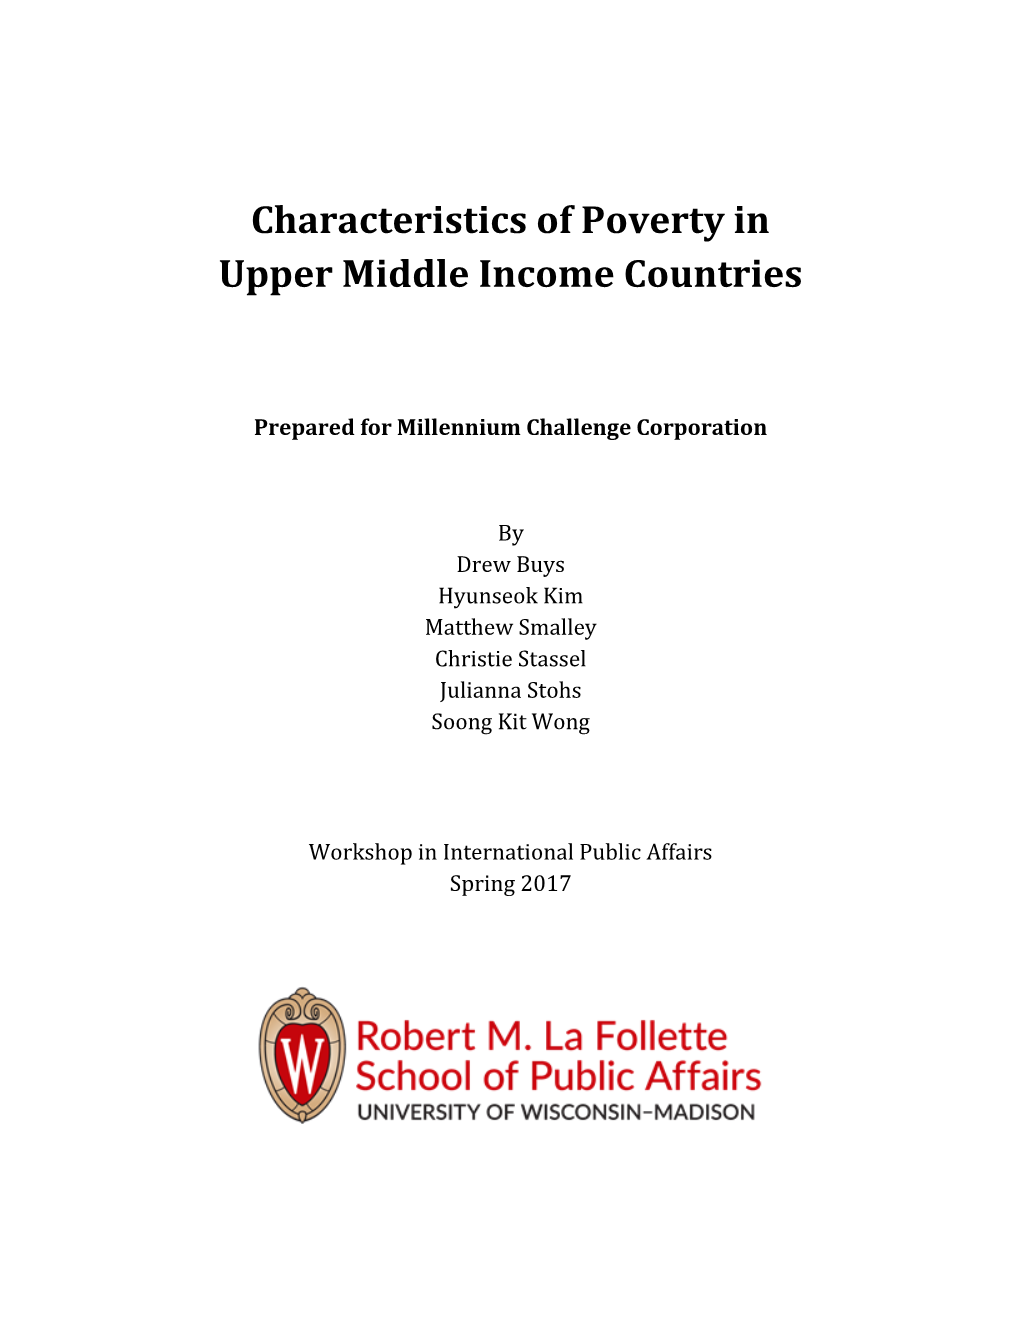 Characteristics of Poverty in Upper Middle Income Countries